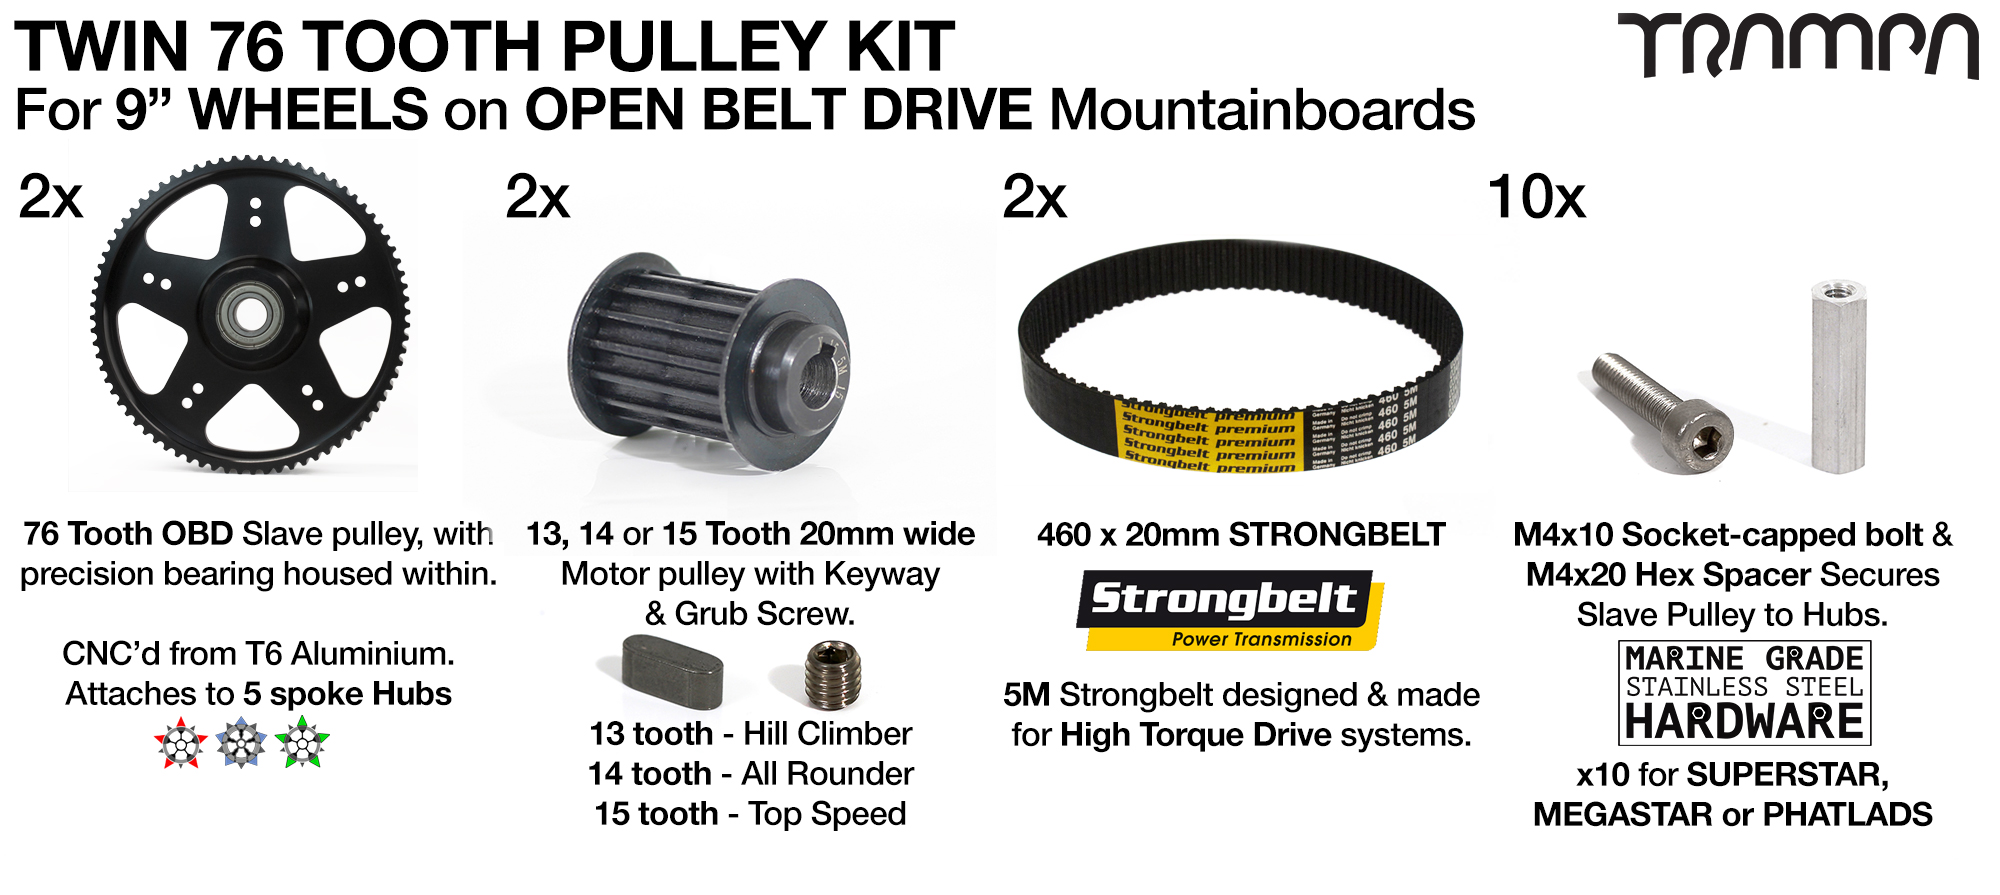 76T Open Belt Drive 76 Tooth Pulley Kit with 460mm x 20mm Belt for 9 Inch Wheels HIGH TORQUE - TWIN